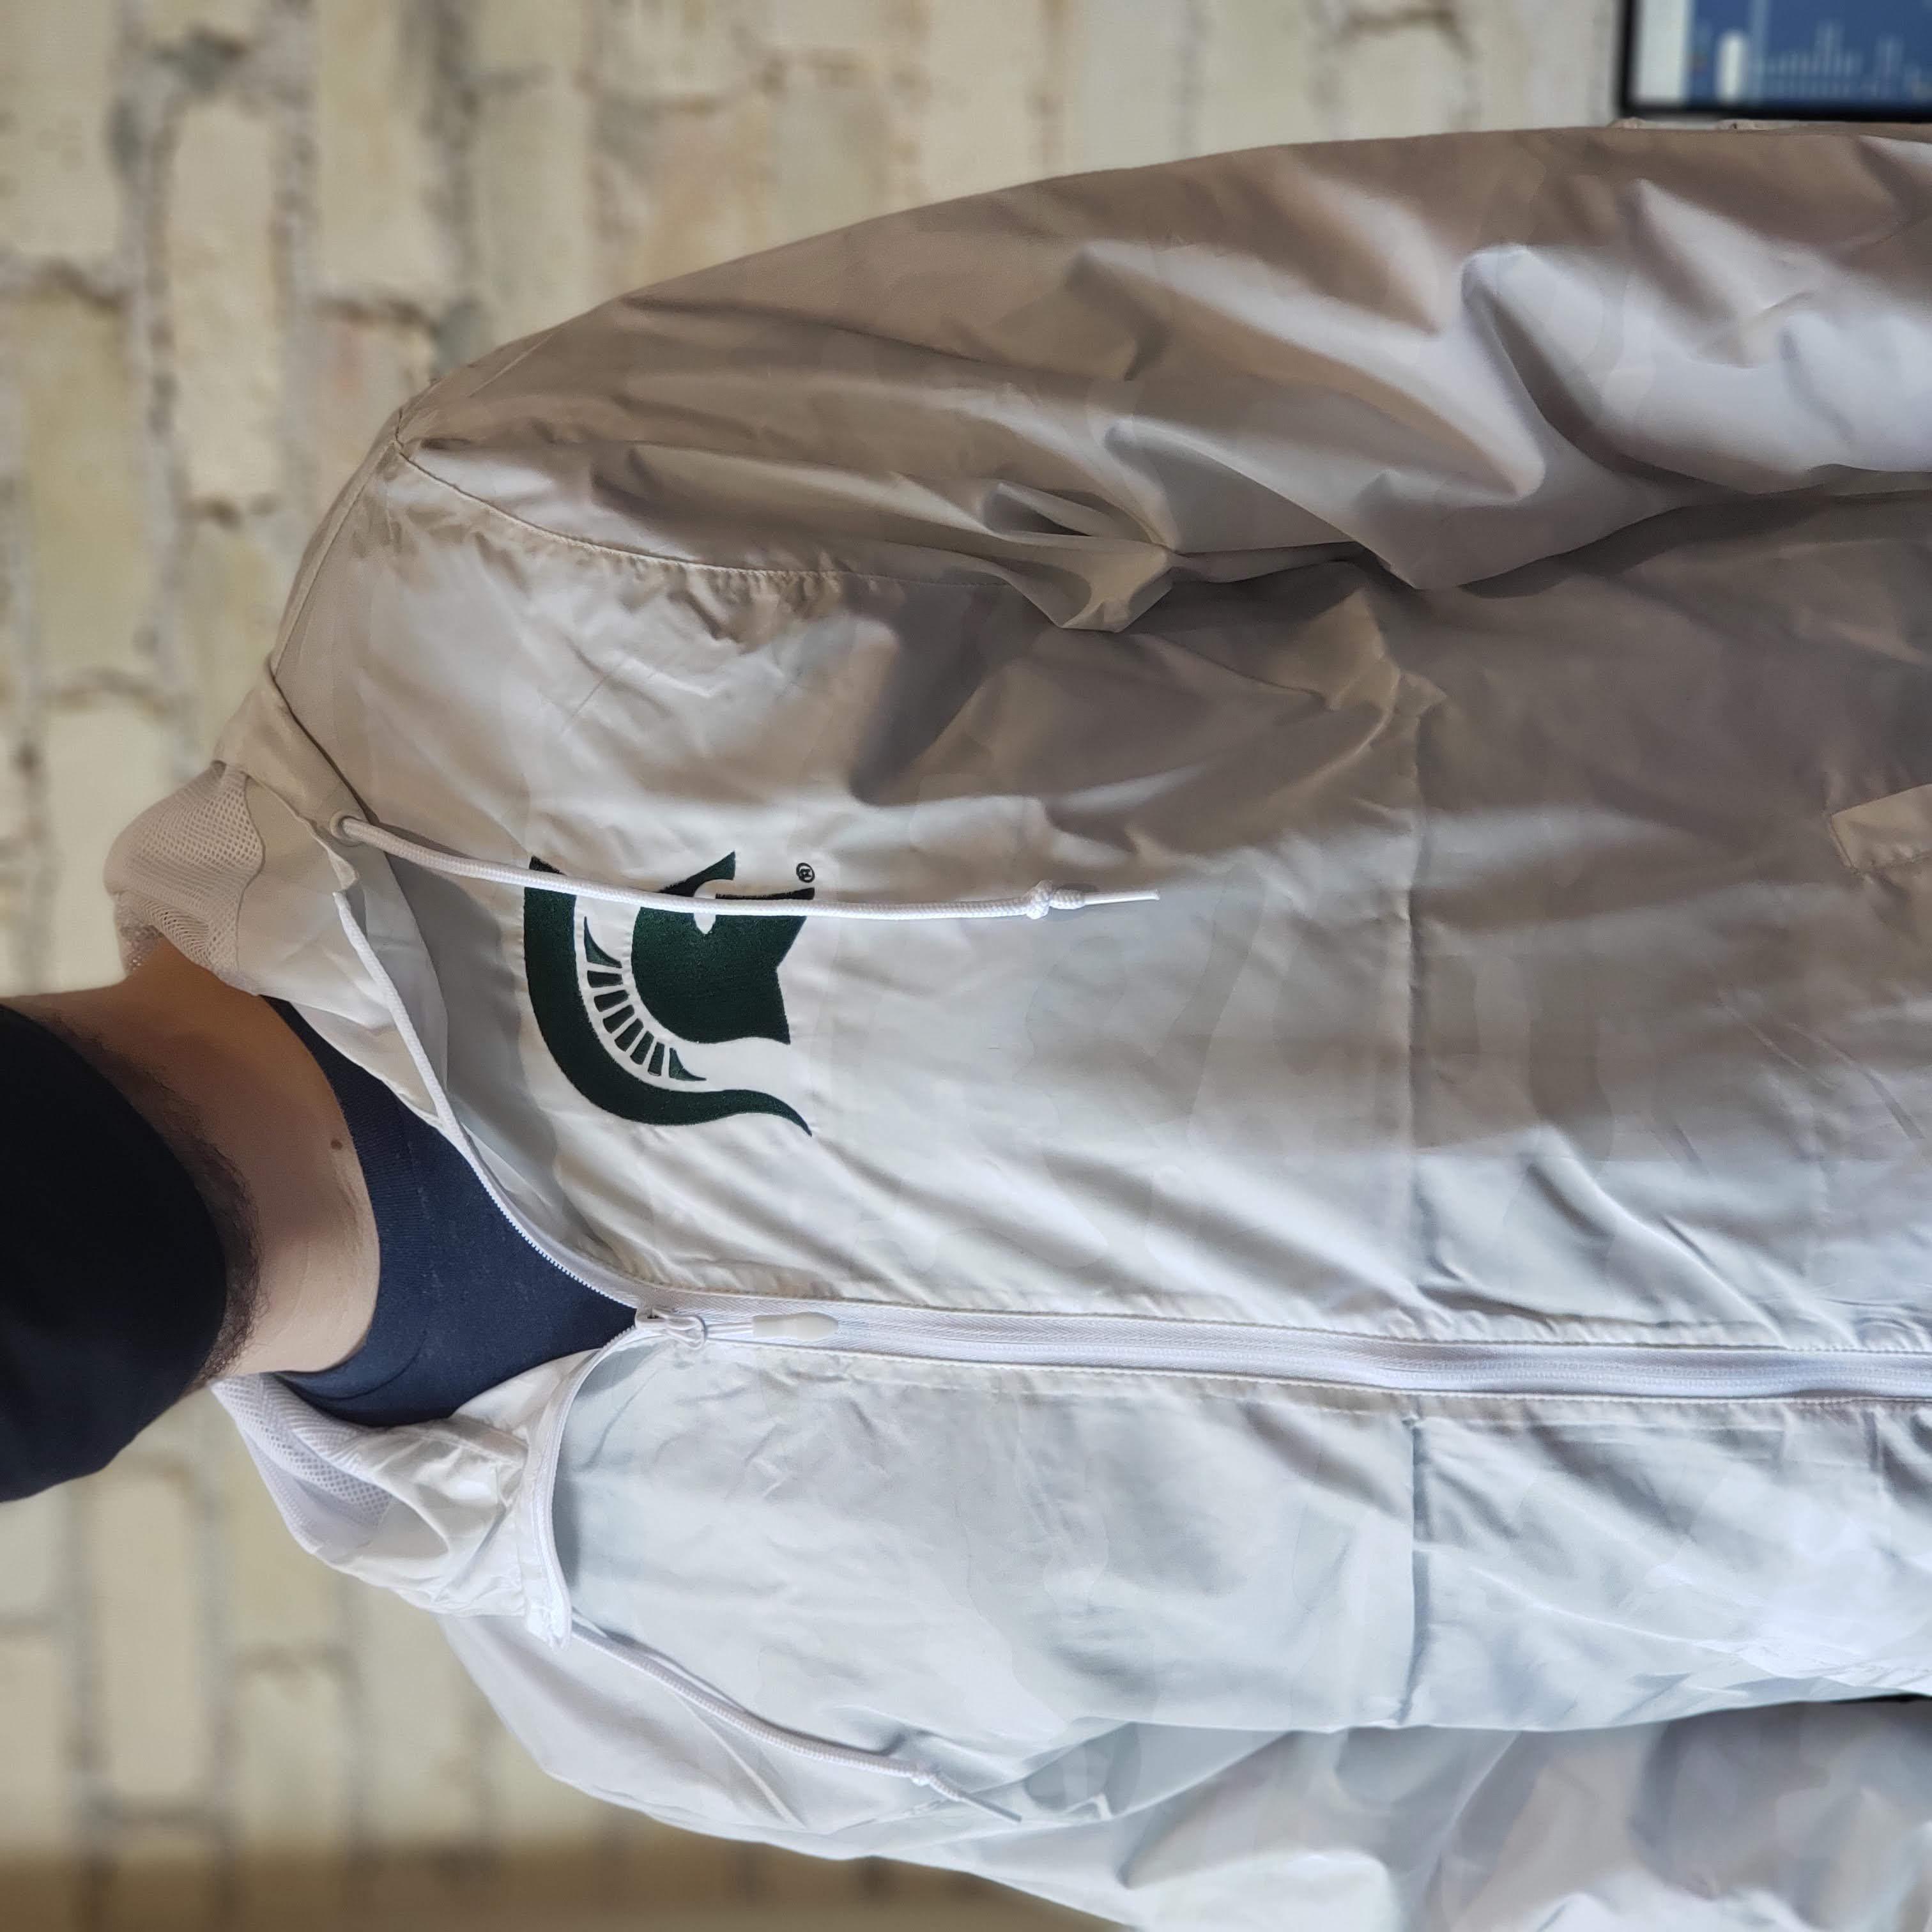 Say Hello to Our Newest Product: The MSU Windbreaker